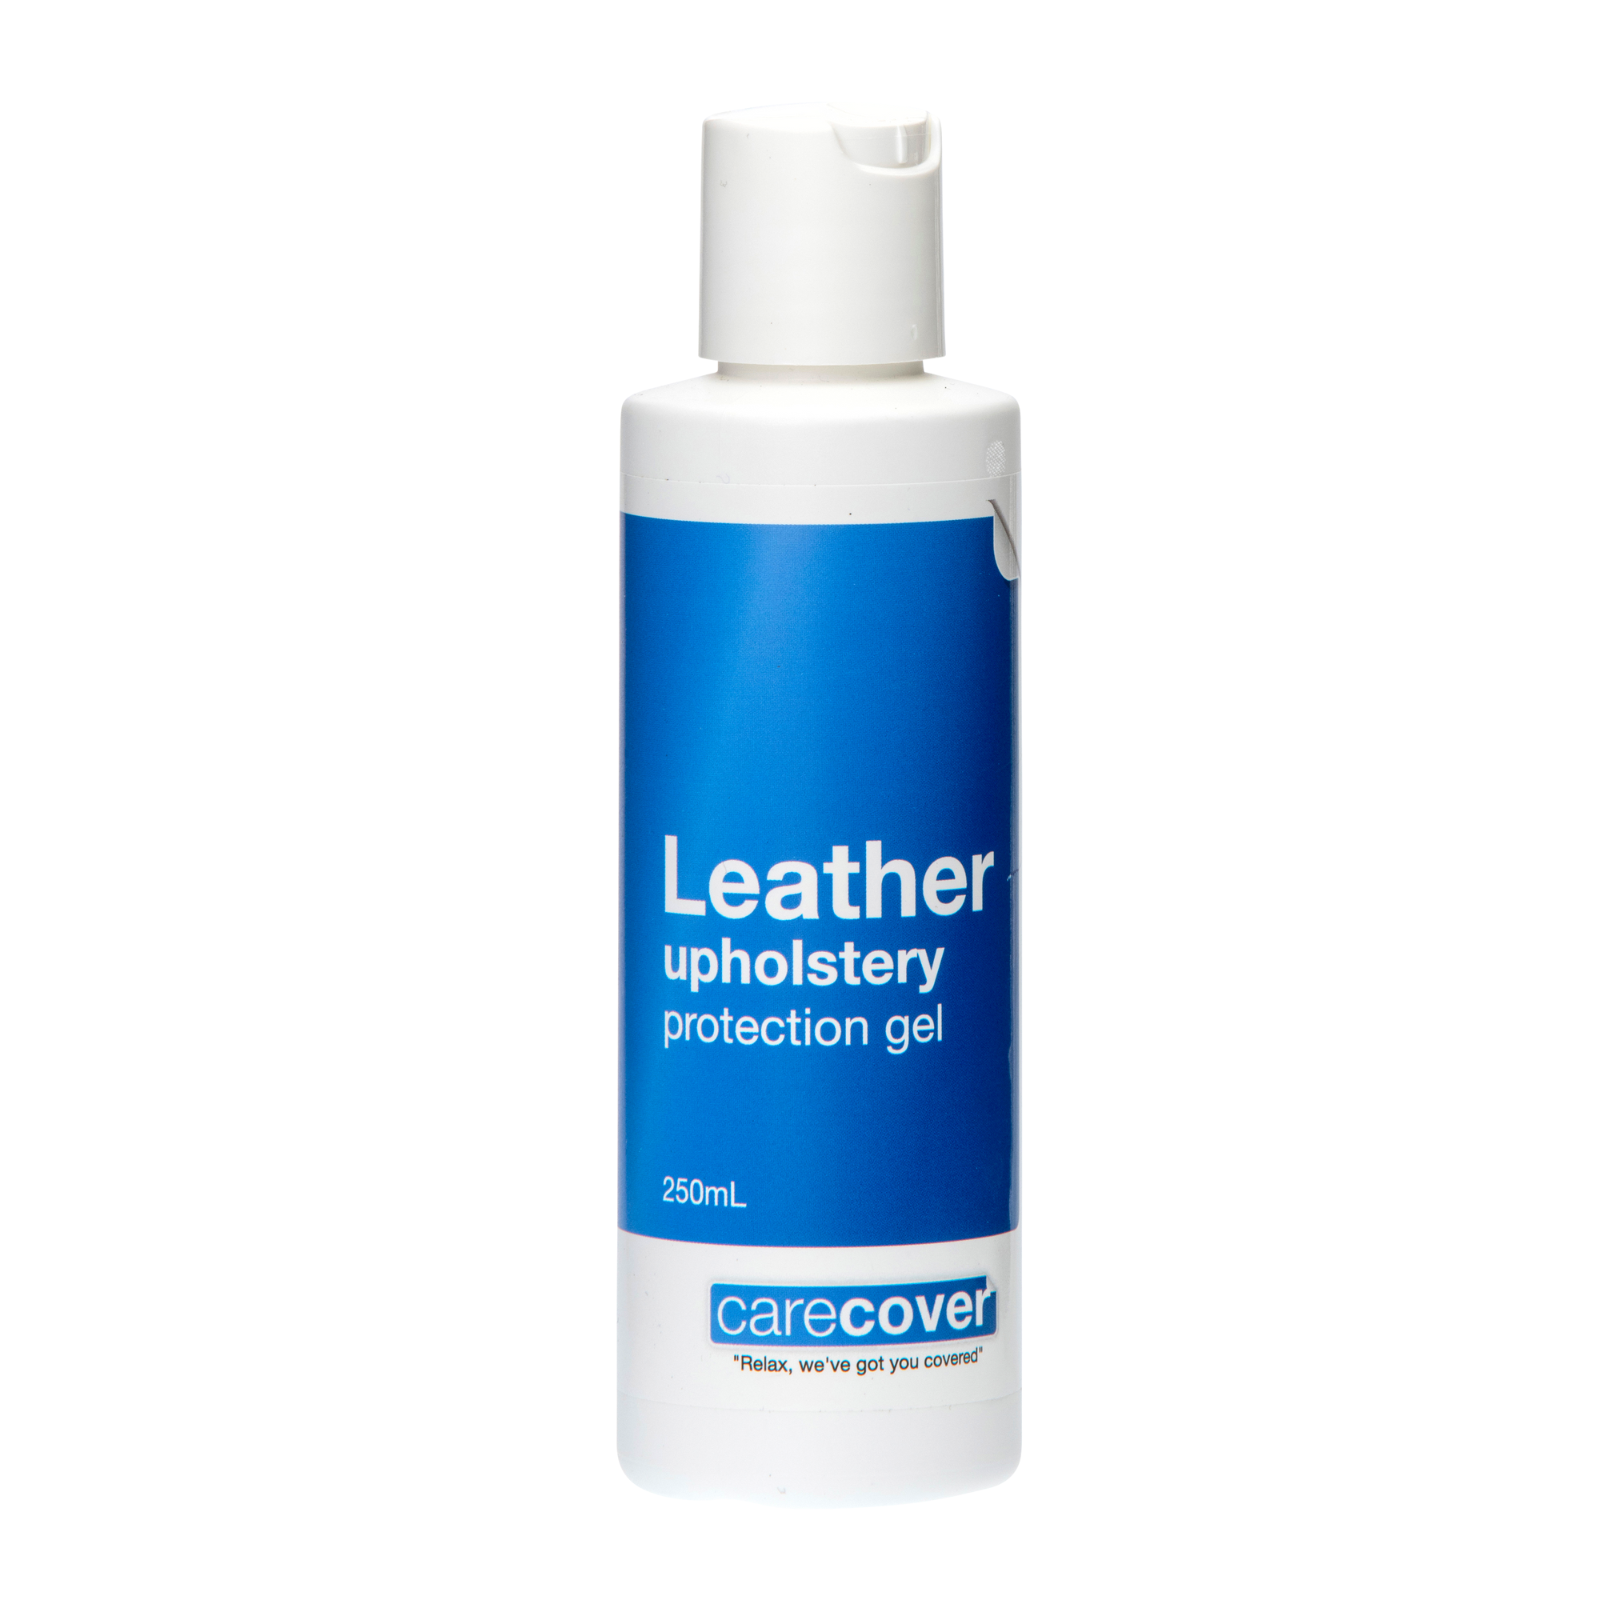 Leather Upholstery Protection Gel